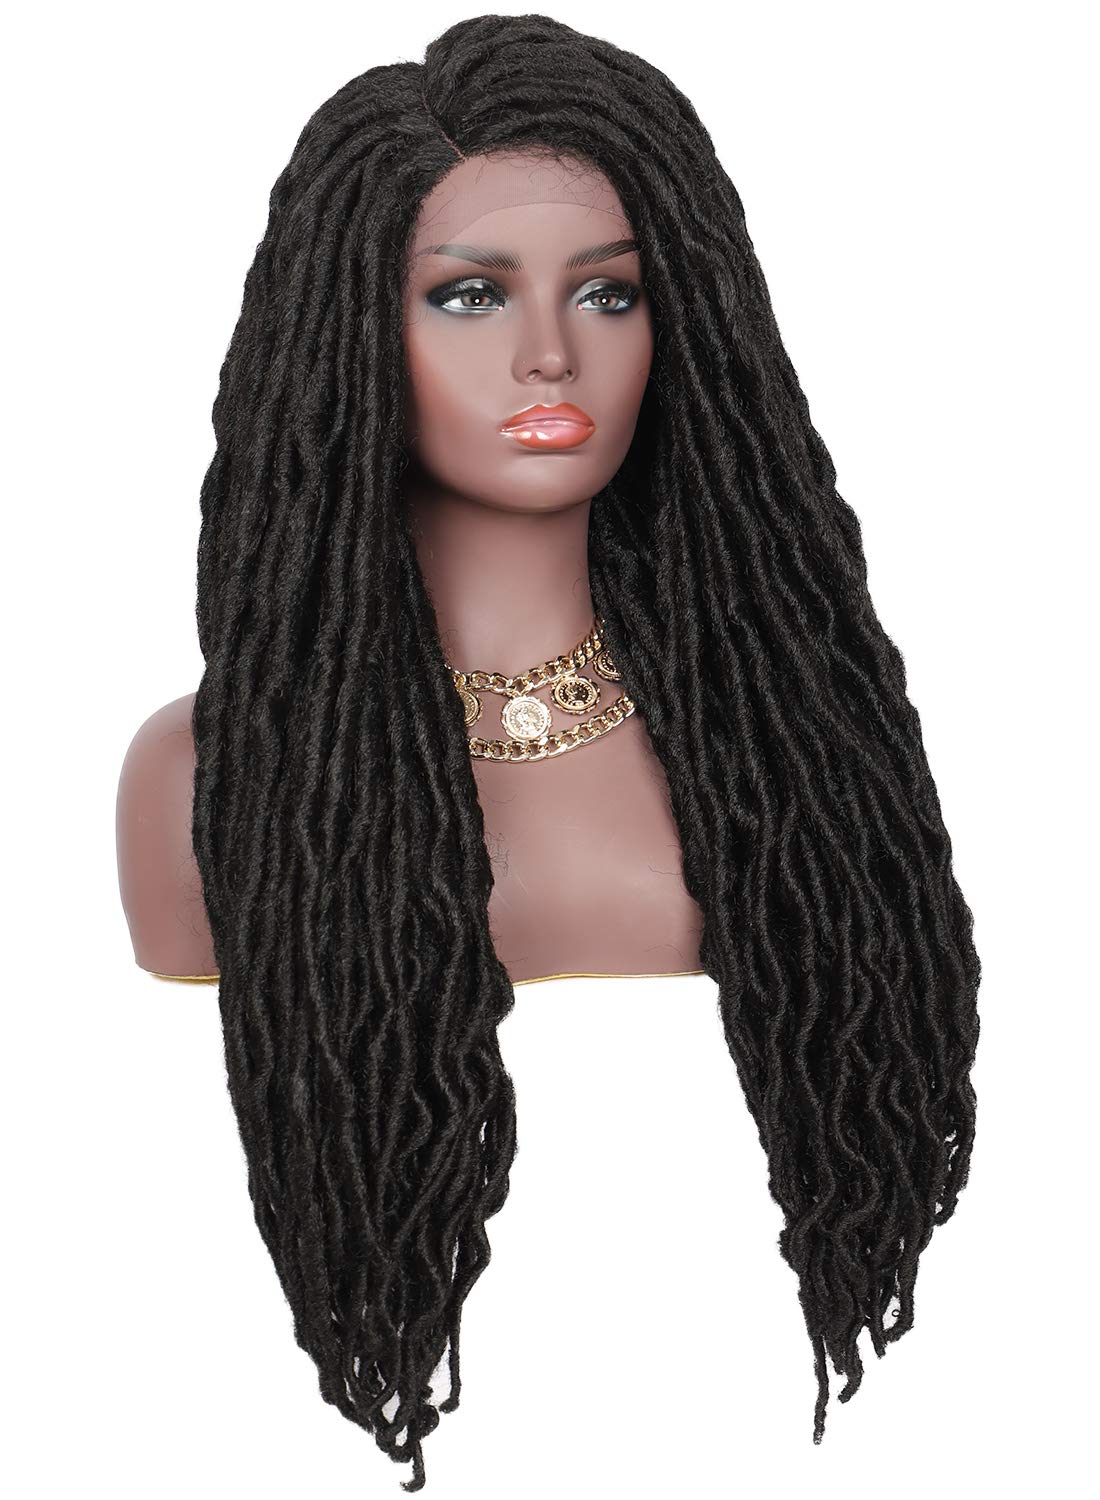 Price:$59.99     Beauart 30” Swiss Lace Front Side Parted Dread Faux Locs Braided Wigs with Baby Hair for Dark Skin Women Japan-made Lightweight Synthetic Hair Handmade Black Braids Wigs   Beauty